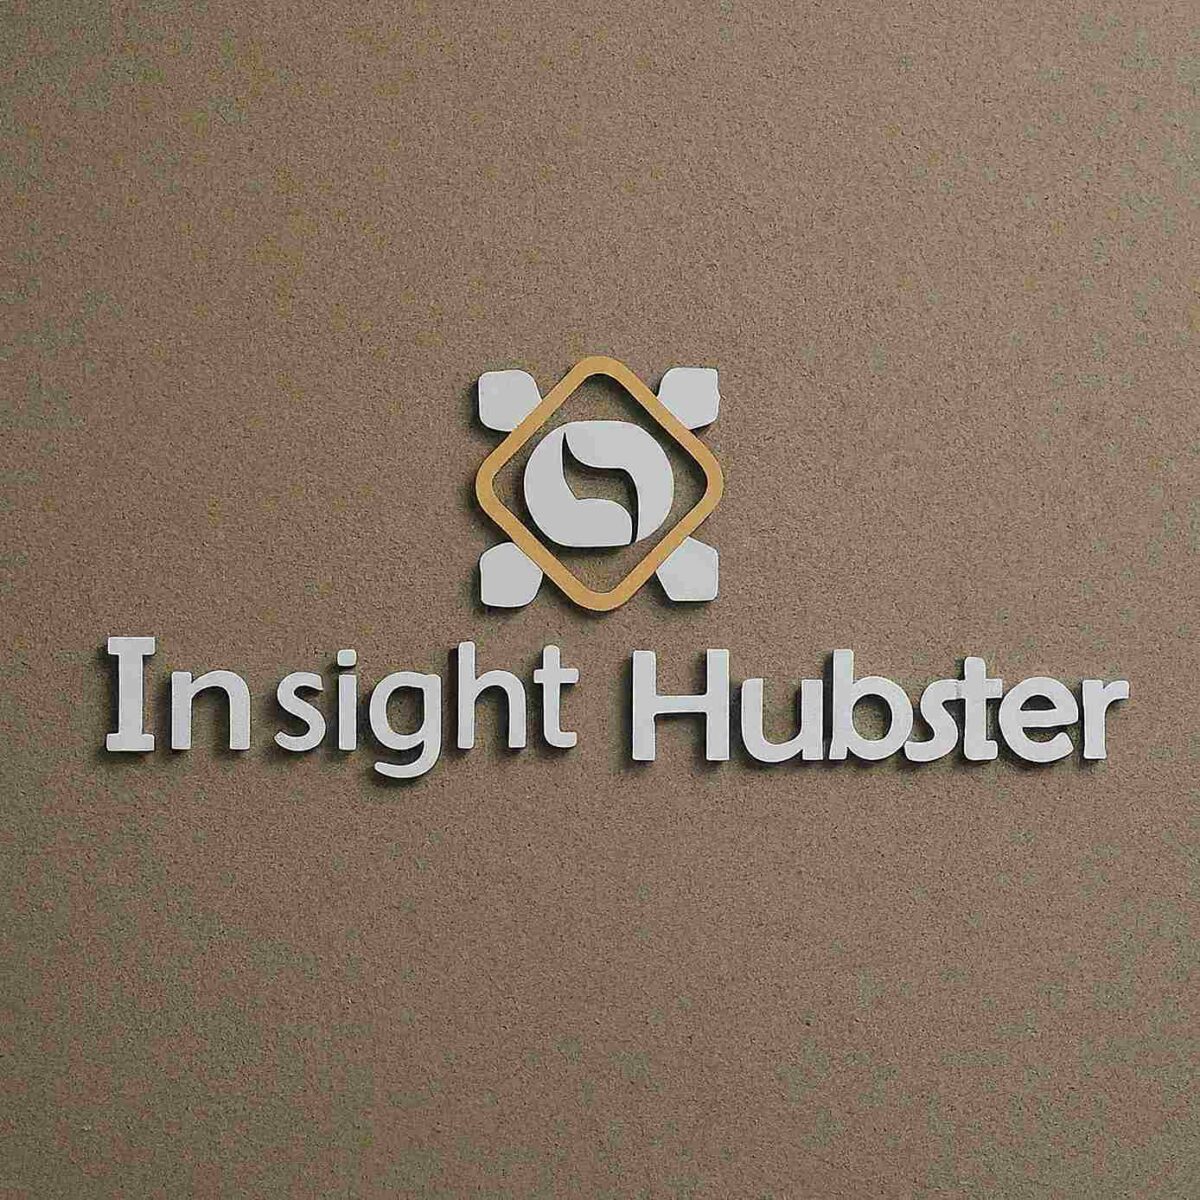 The Future of Customer Intelligence: How Insight Hubster Paves the Way